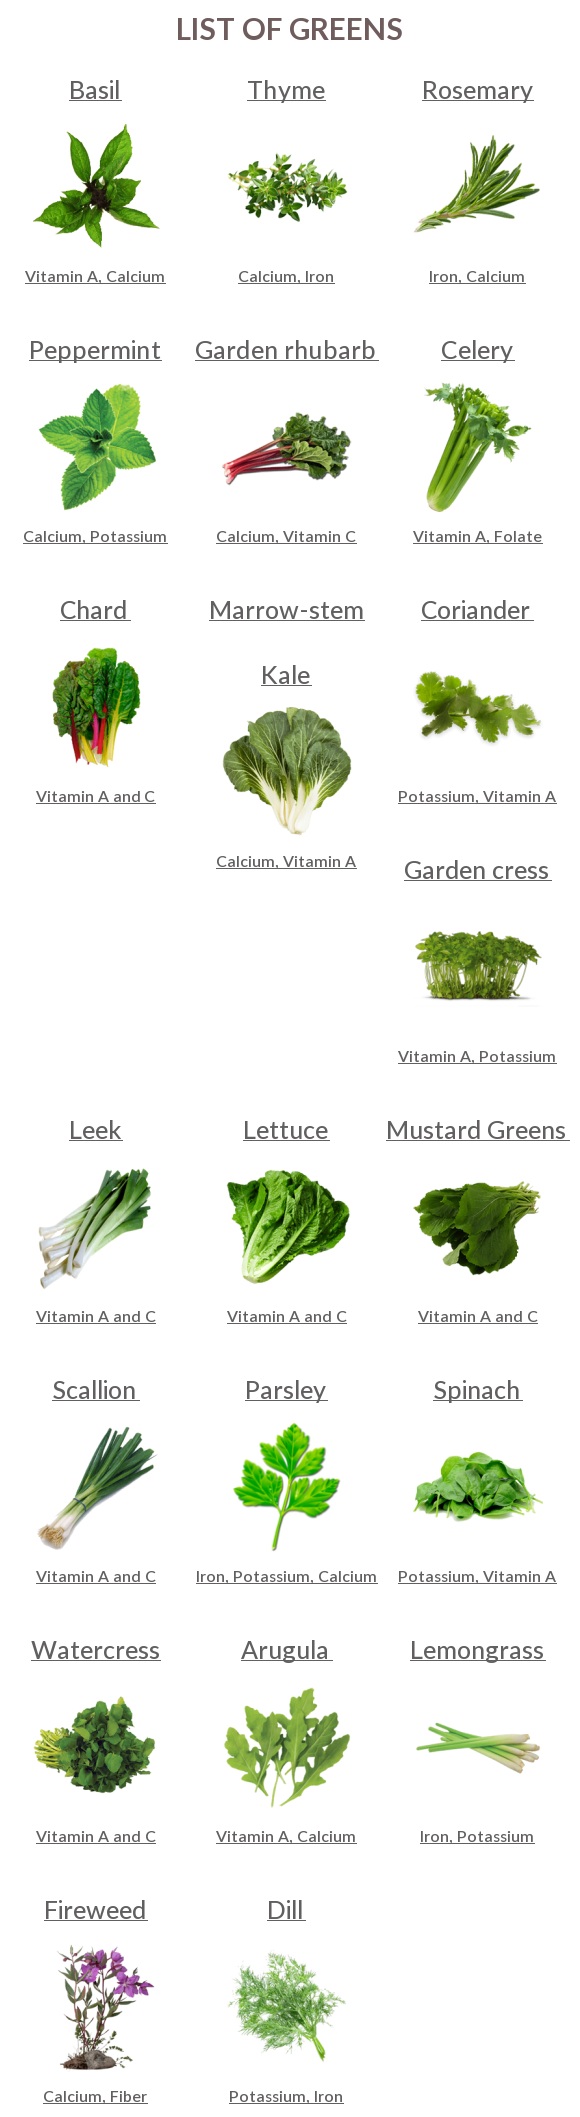 Greens full list with names, images and nutrition info